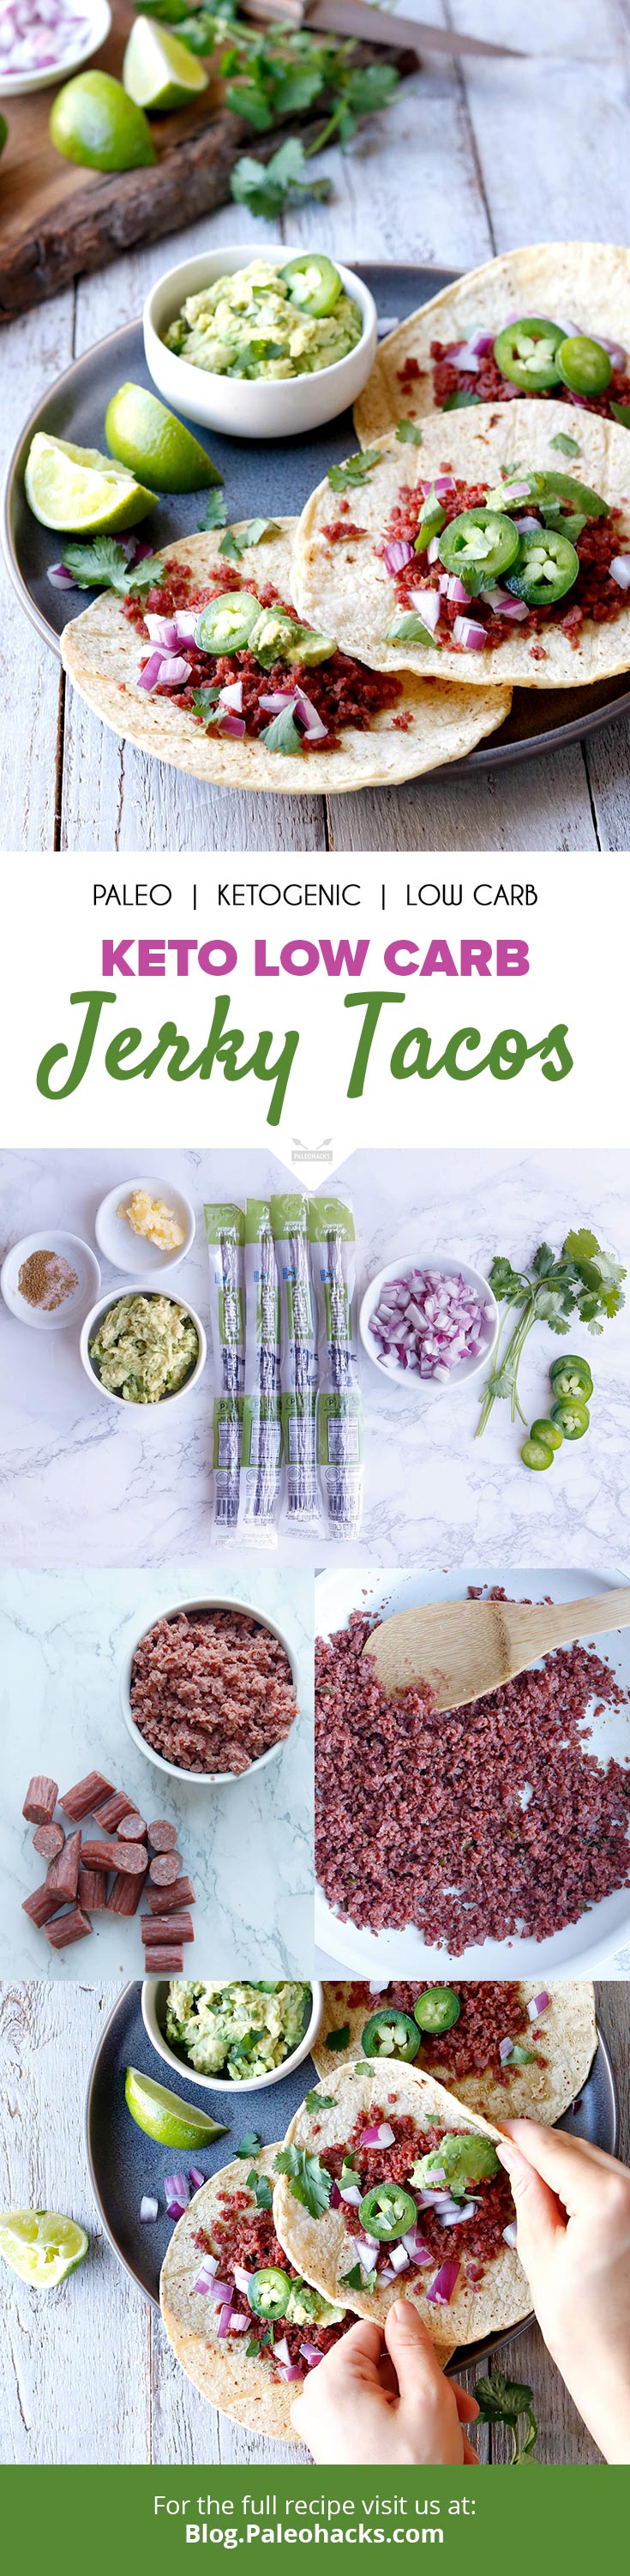 Chow down on these keto tacos filled with jalapeño-spiced beef jerky. To keep this recipe keto-friendly, serve the taco fillings on a keto “tortilla”.